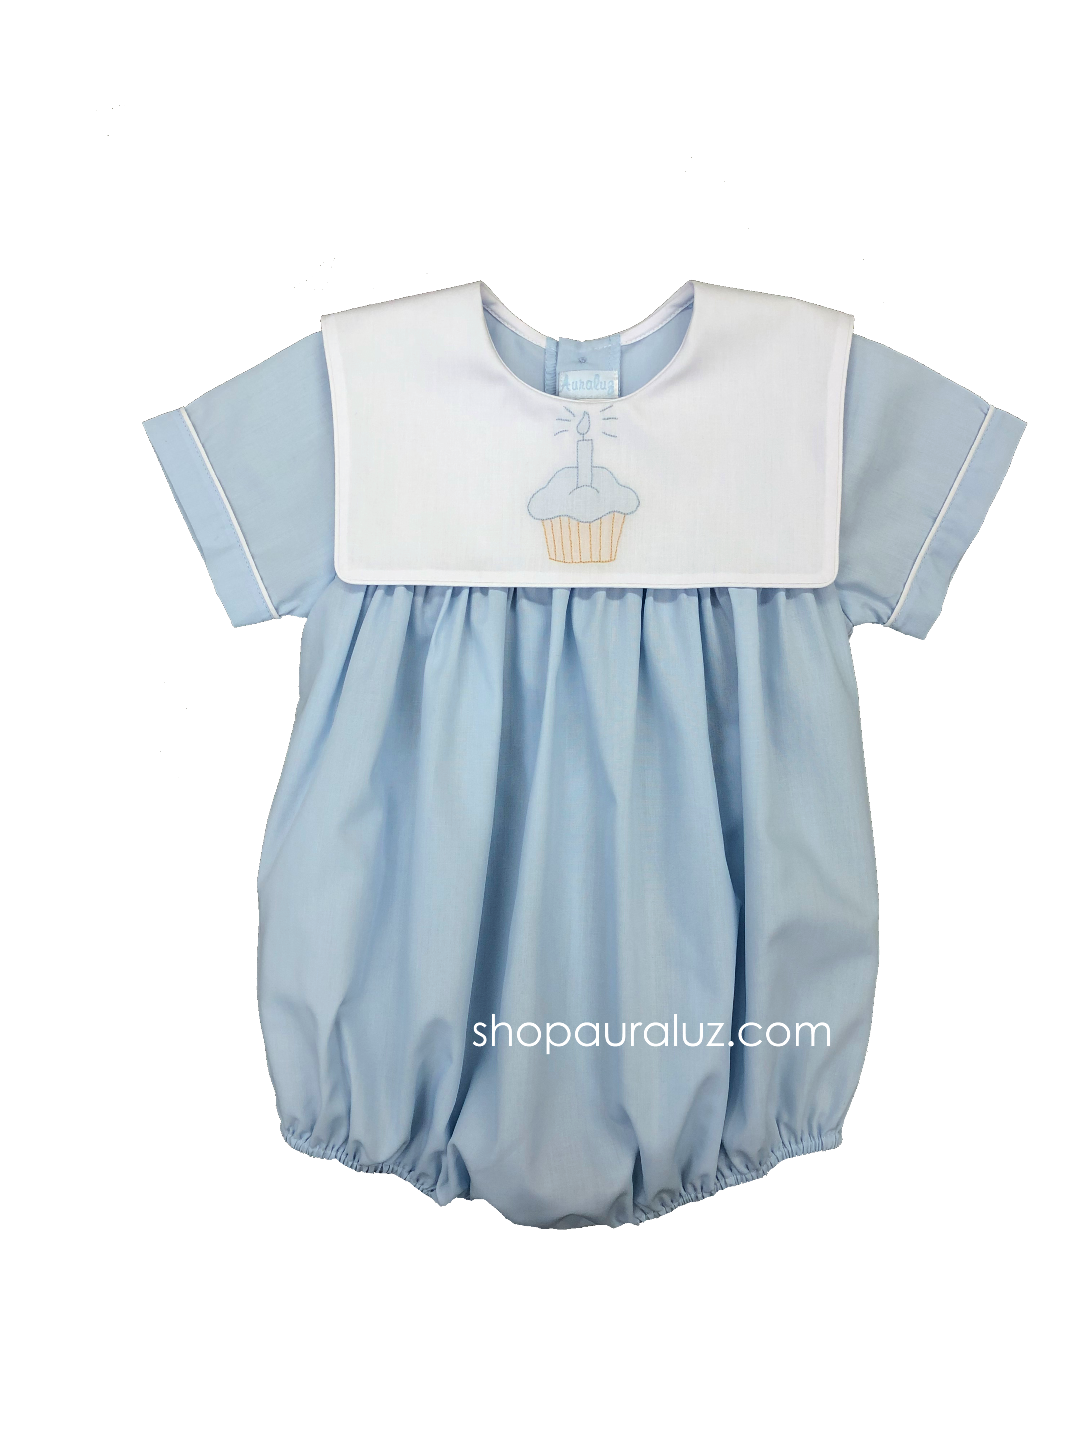 Auraluz Boy Bubble..Blue with embroidered cupcake. STORE EXCLUSIVE!